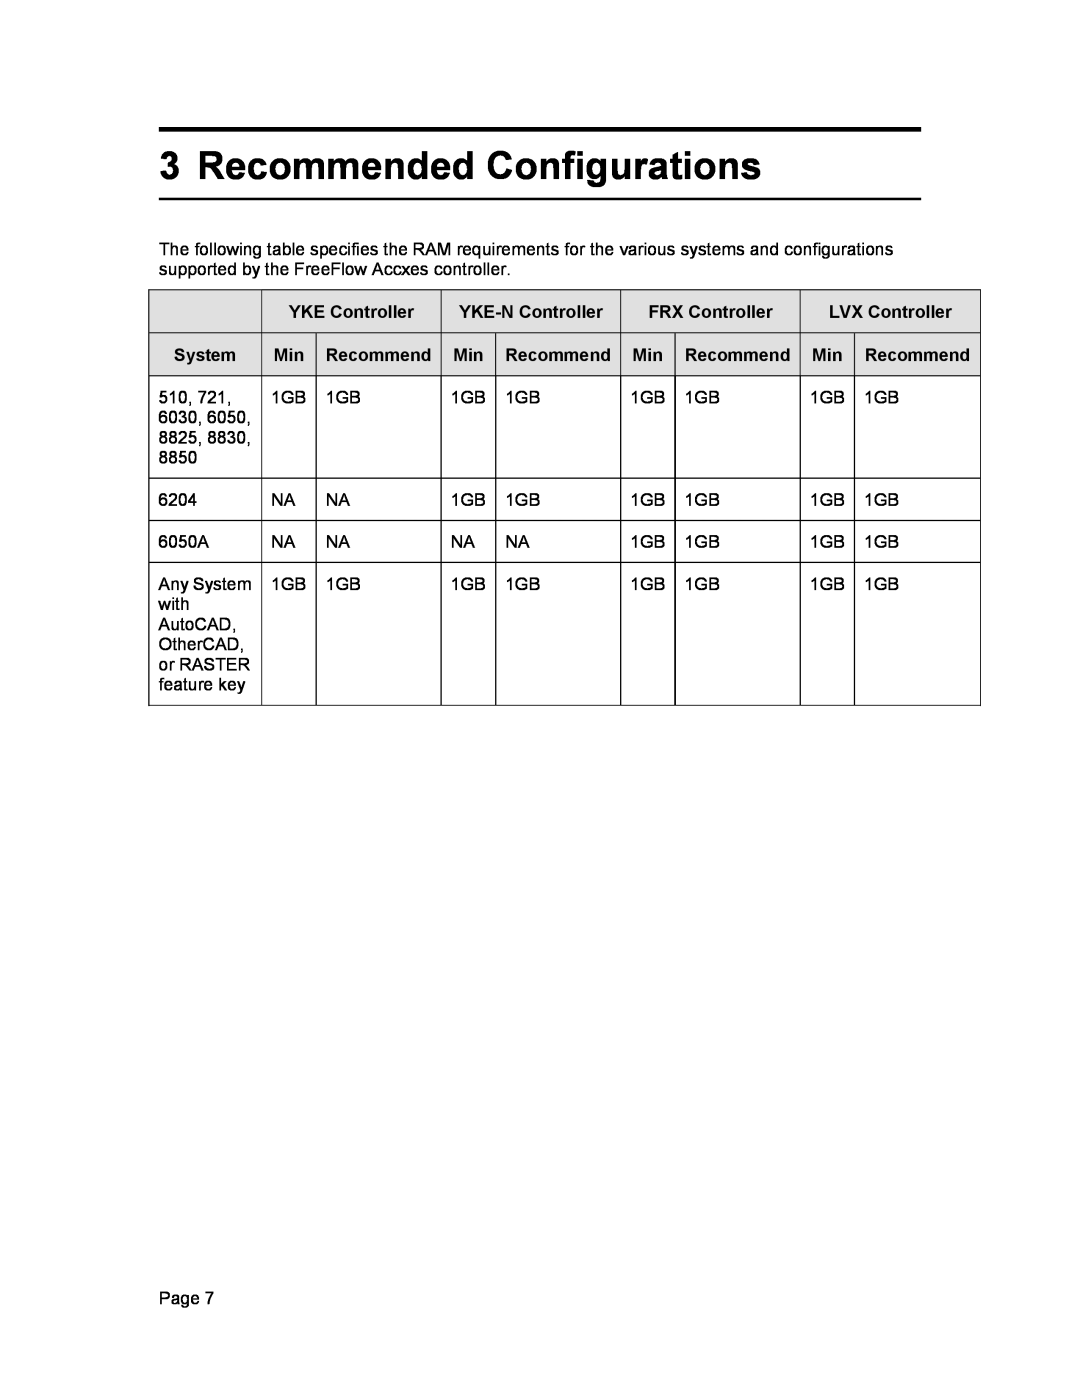 Xerox 12.7 B 114 manual Recommended Configurations, YKE Controller, YKE-NController, FRX Controller, LVX Controller, System 